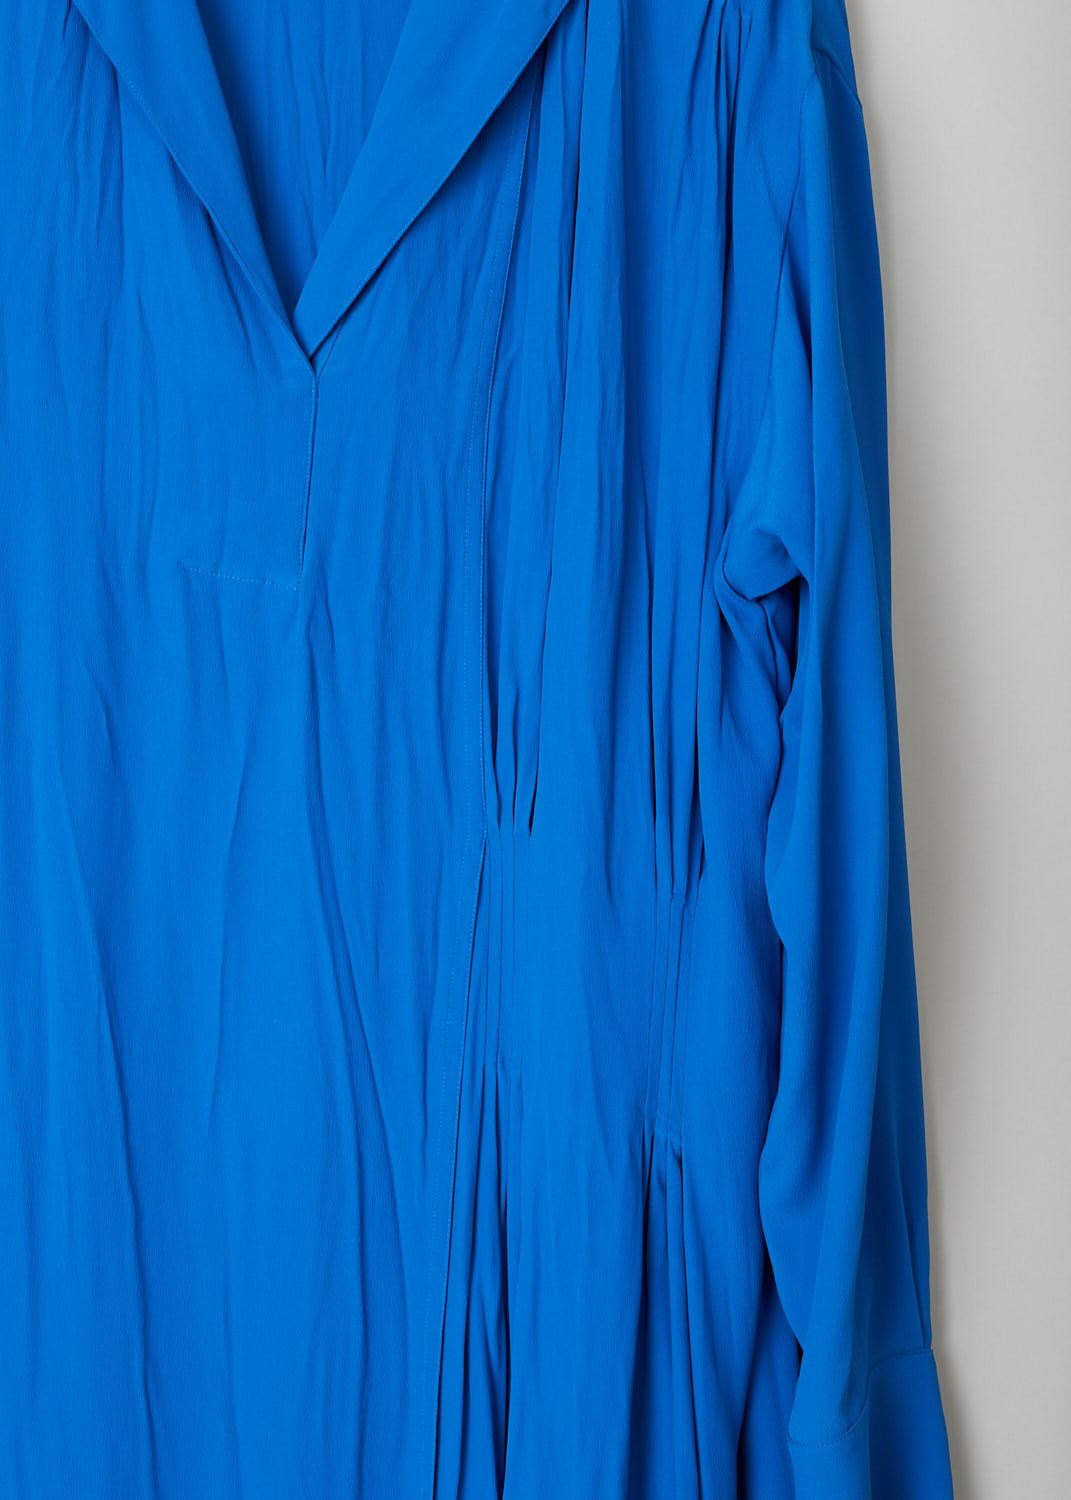 MARNI, ROYAL BLUE ASYMMETRICAL COLLAR DRESS, ABMA0171A0_TA089_00B57, Blue, Detail, The royal blue dress features a notched lapel and a split neckline. The long sleeves have buttoned cuffs. The dress is mid-length and has a wider fit. A pleated detail can be found on one side and the dress has a layered skirt. 
